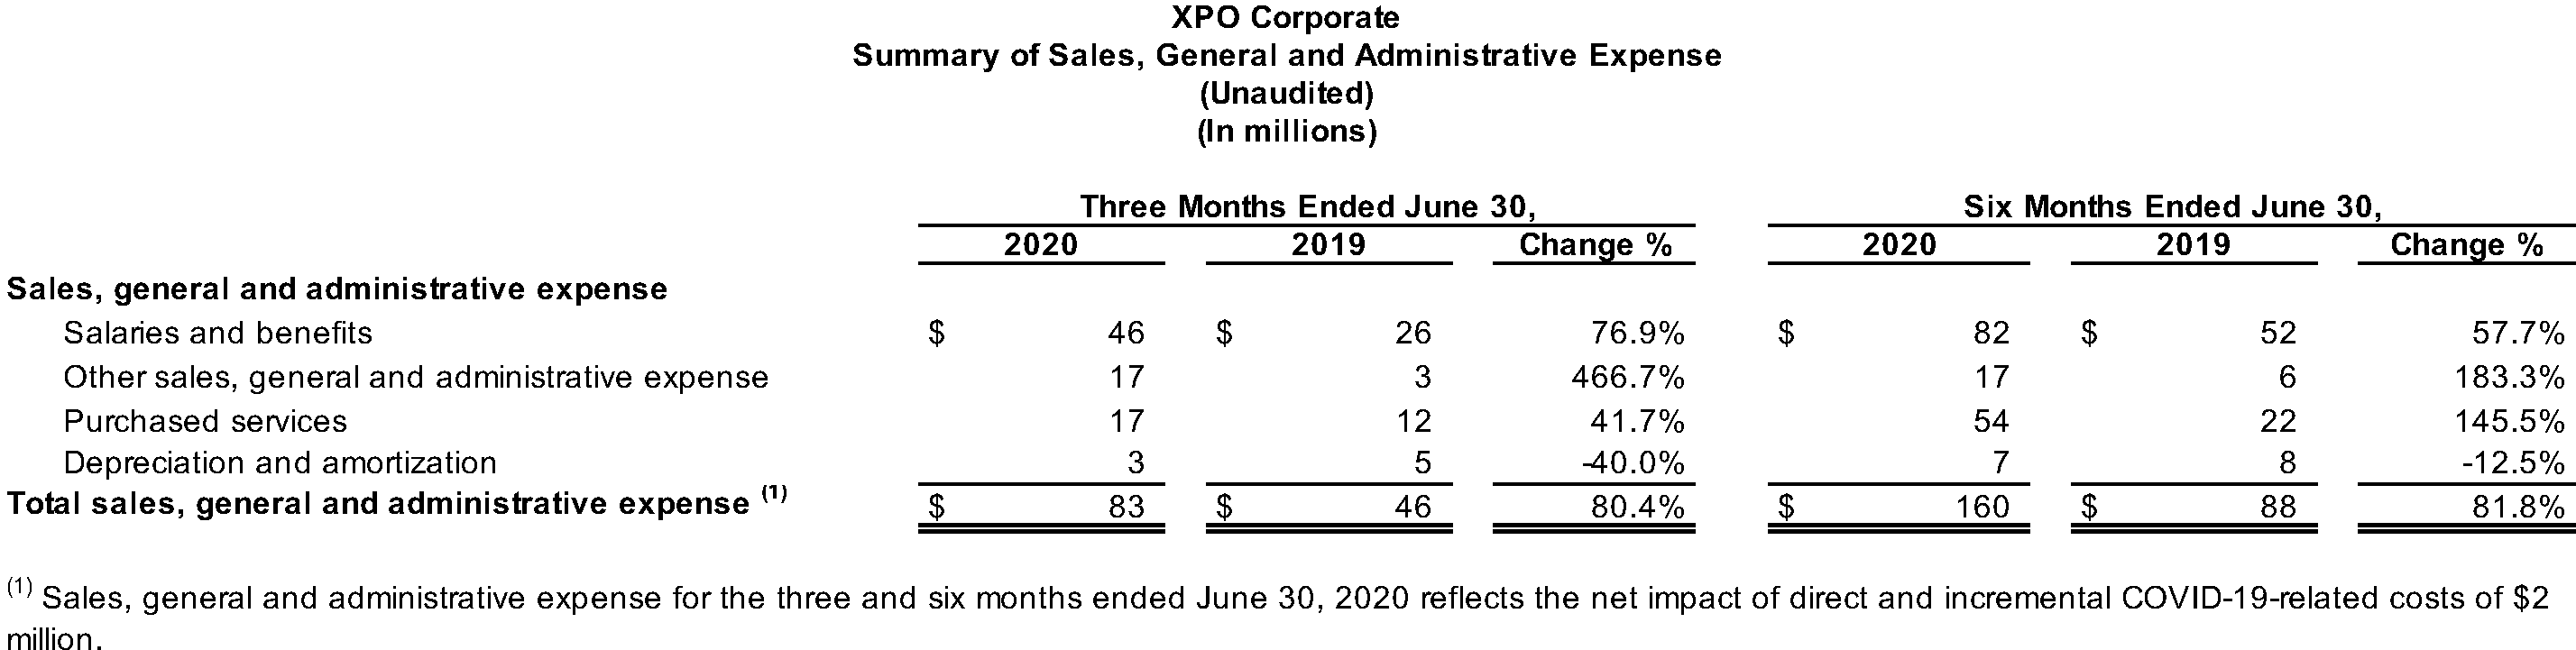 XPO Corporate Summary of Sales, General and Administrative Expense